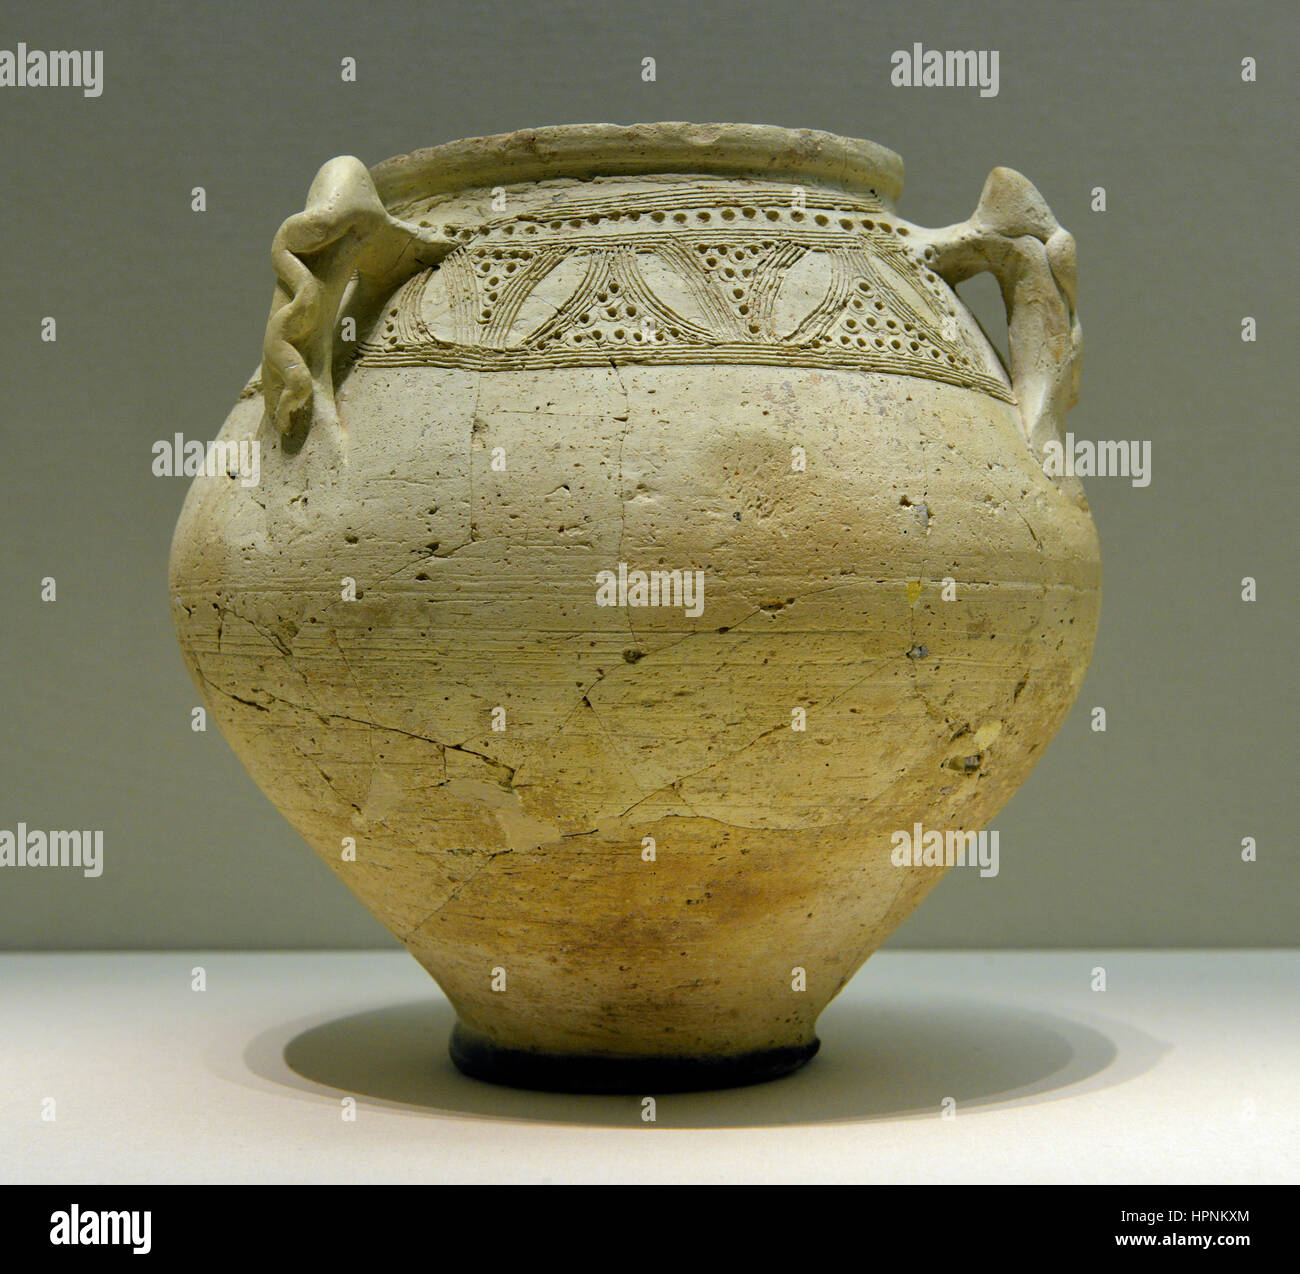 Jar with handles. 8th-10th century CE. Earthenware, incised decoration. Department of Archaeology, King Saudi University, Riyadh. Stock Photo